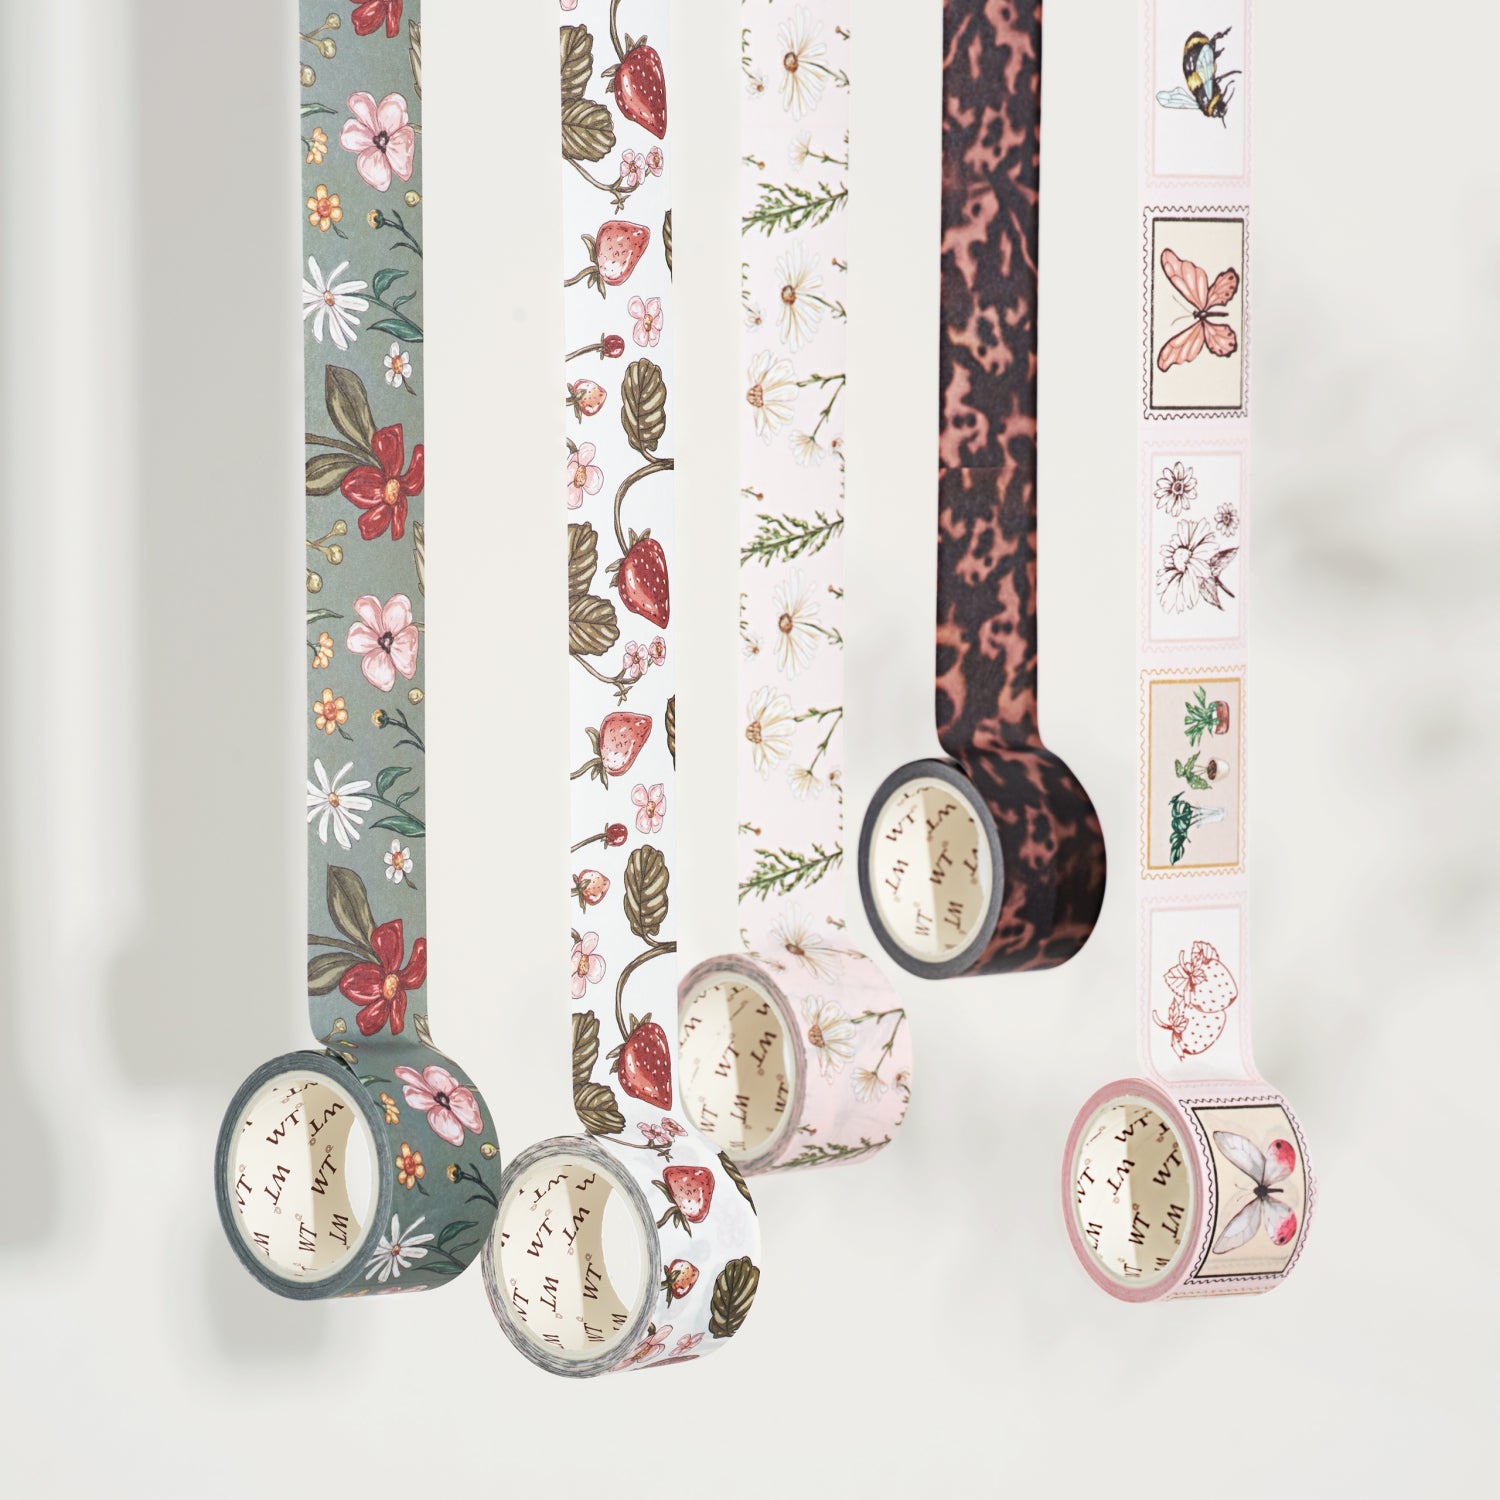 In Bloom Washi Tape Set | The Washi Tape Shop. Beautiful Washi and Decorative Tape For Bullet Journals, Gift Wrapping, Planner Decoration and DIY Projects